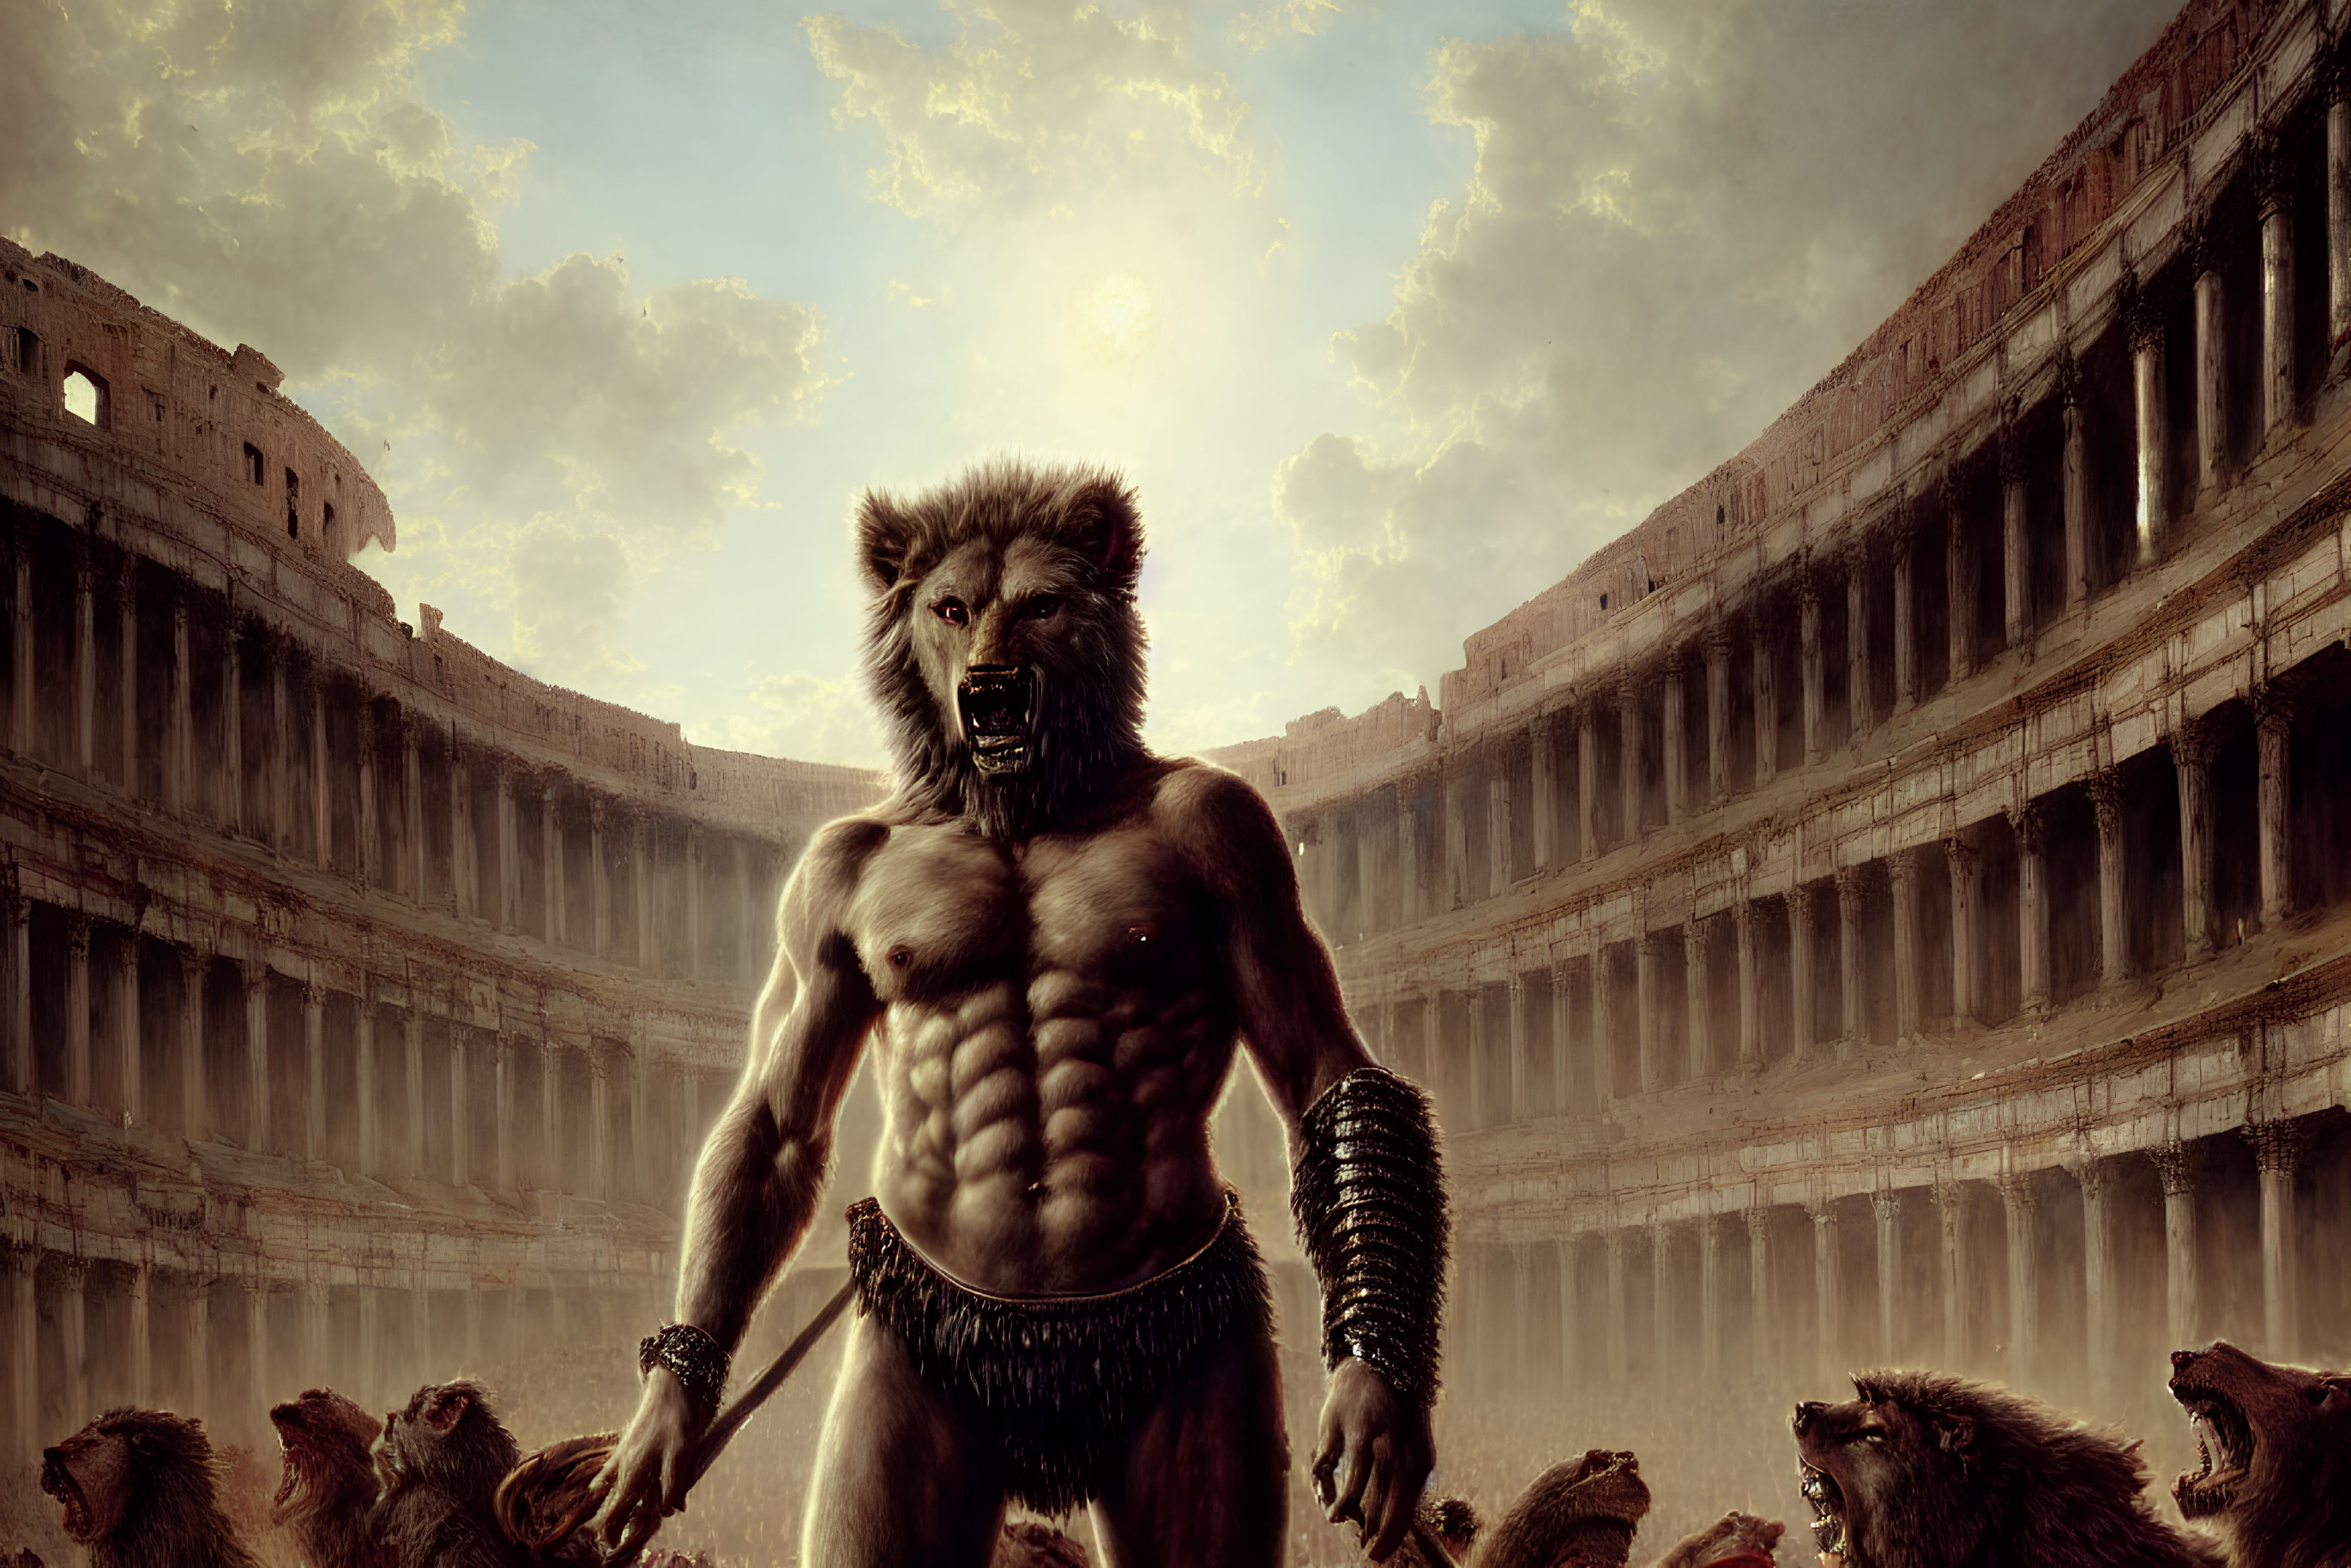 Muscular lion-headed humanoid in gladiator attire in ancient arena with lions under dramatic sky.